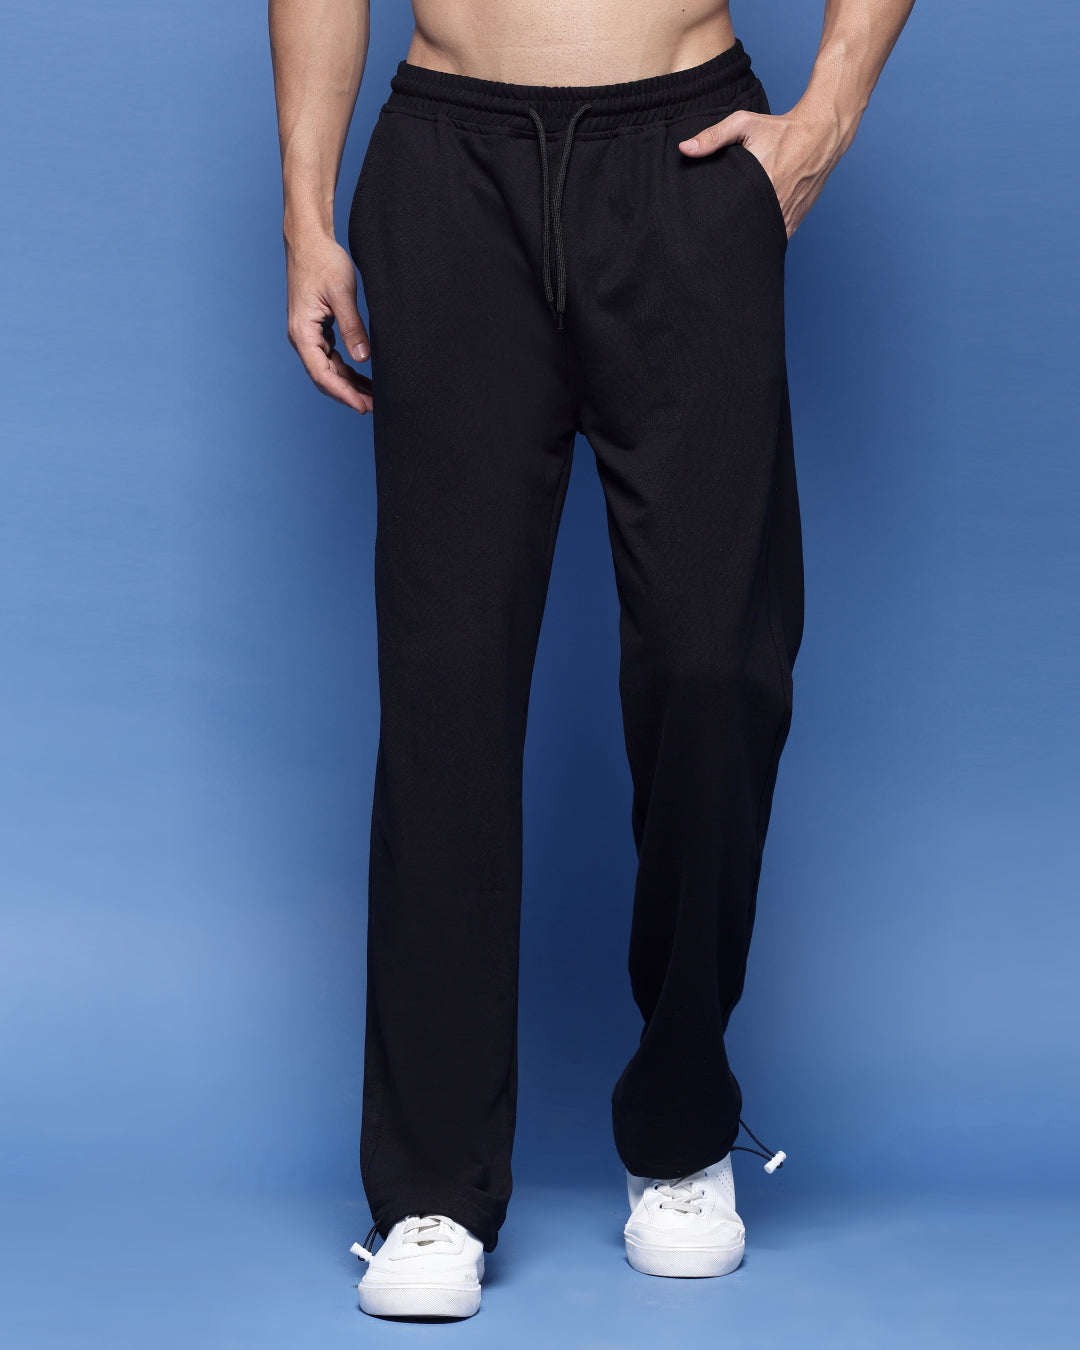 French Terry Sweat Pant - Black – Dharma Bums Yoga and Activewear